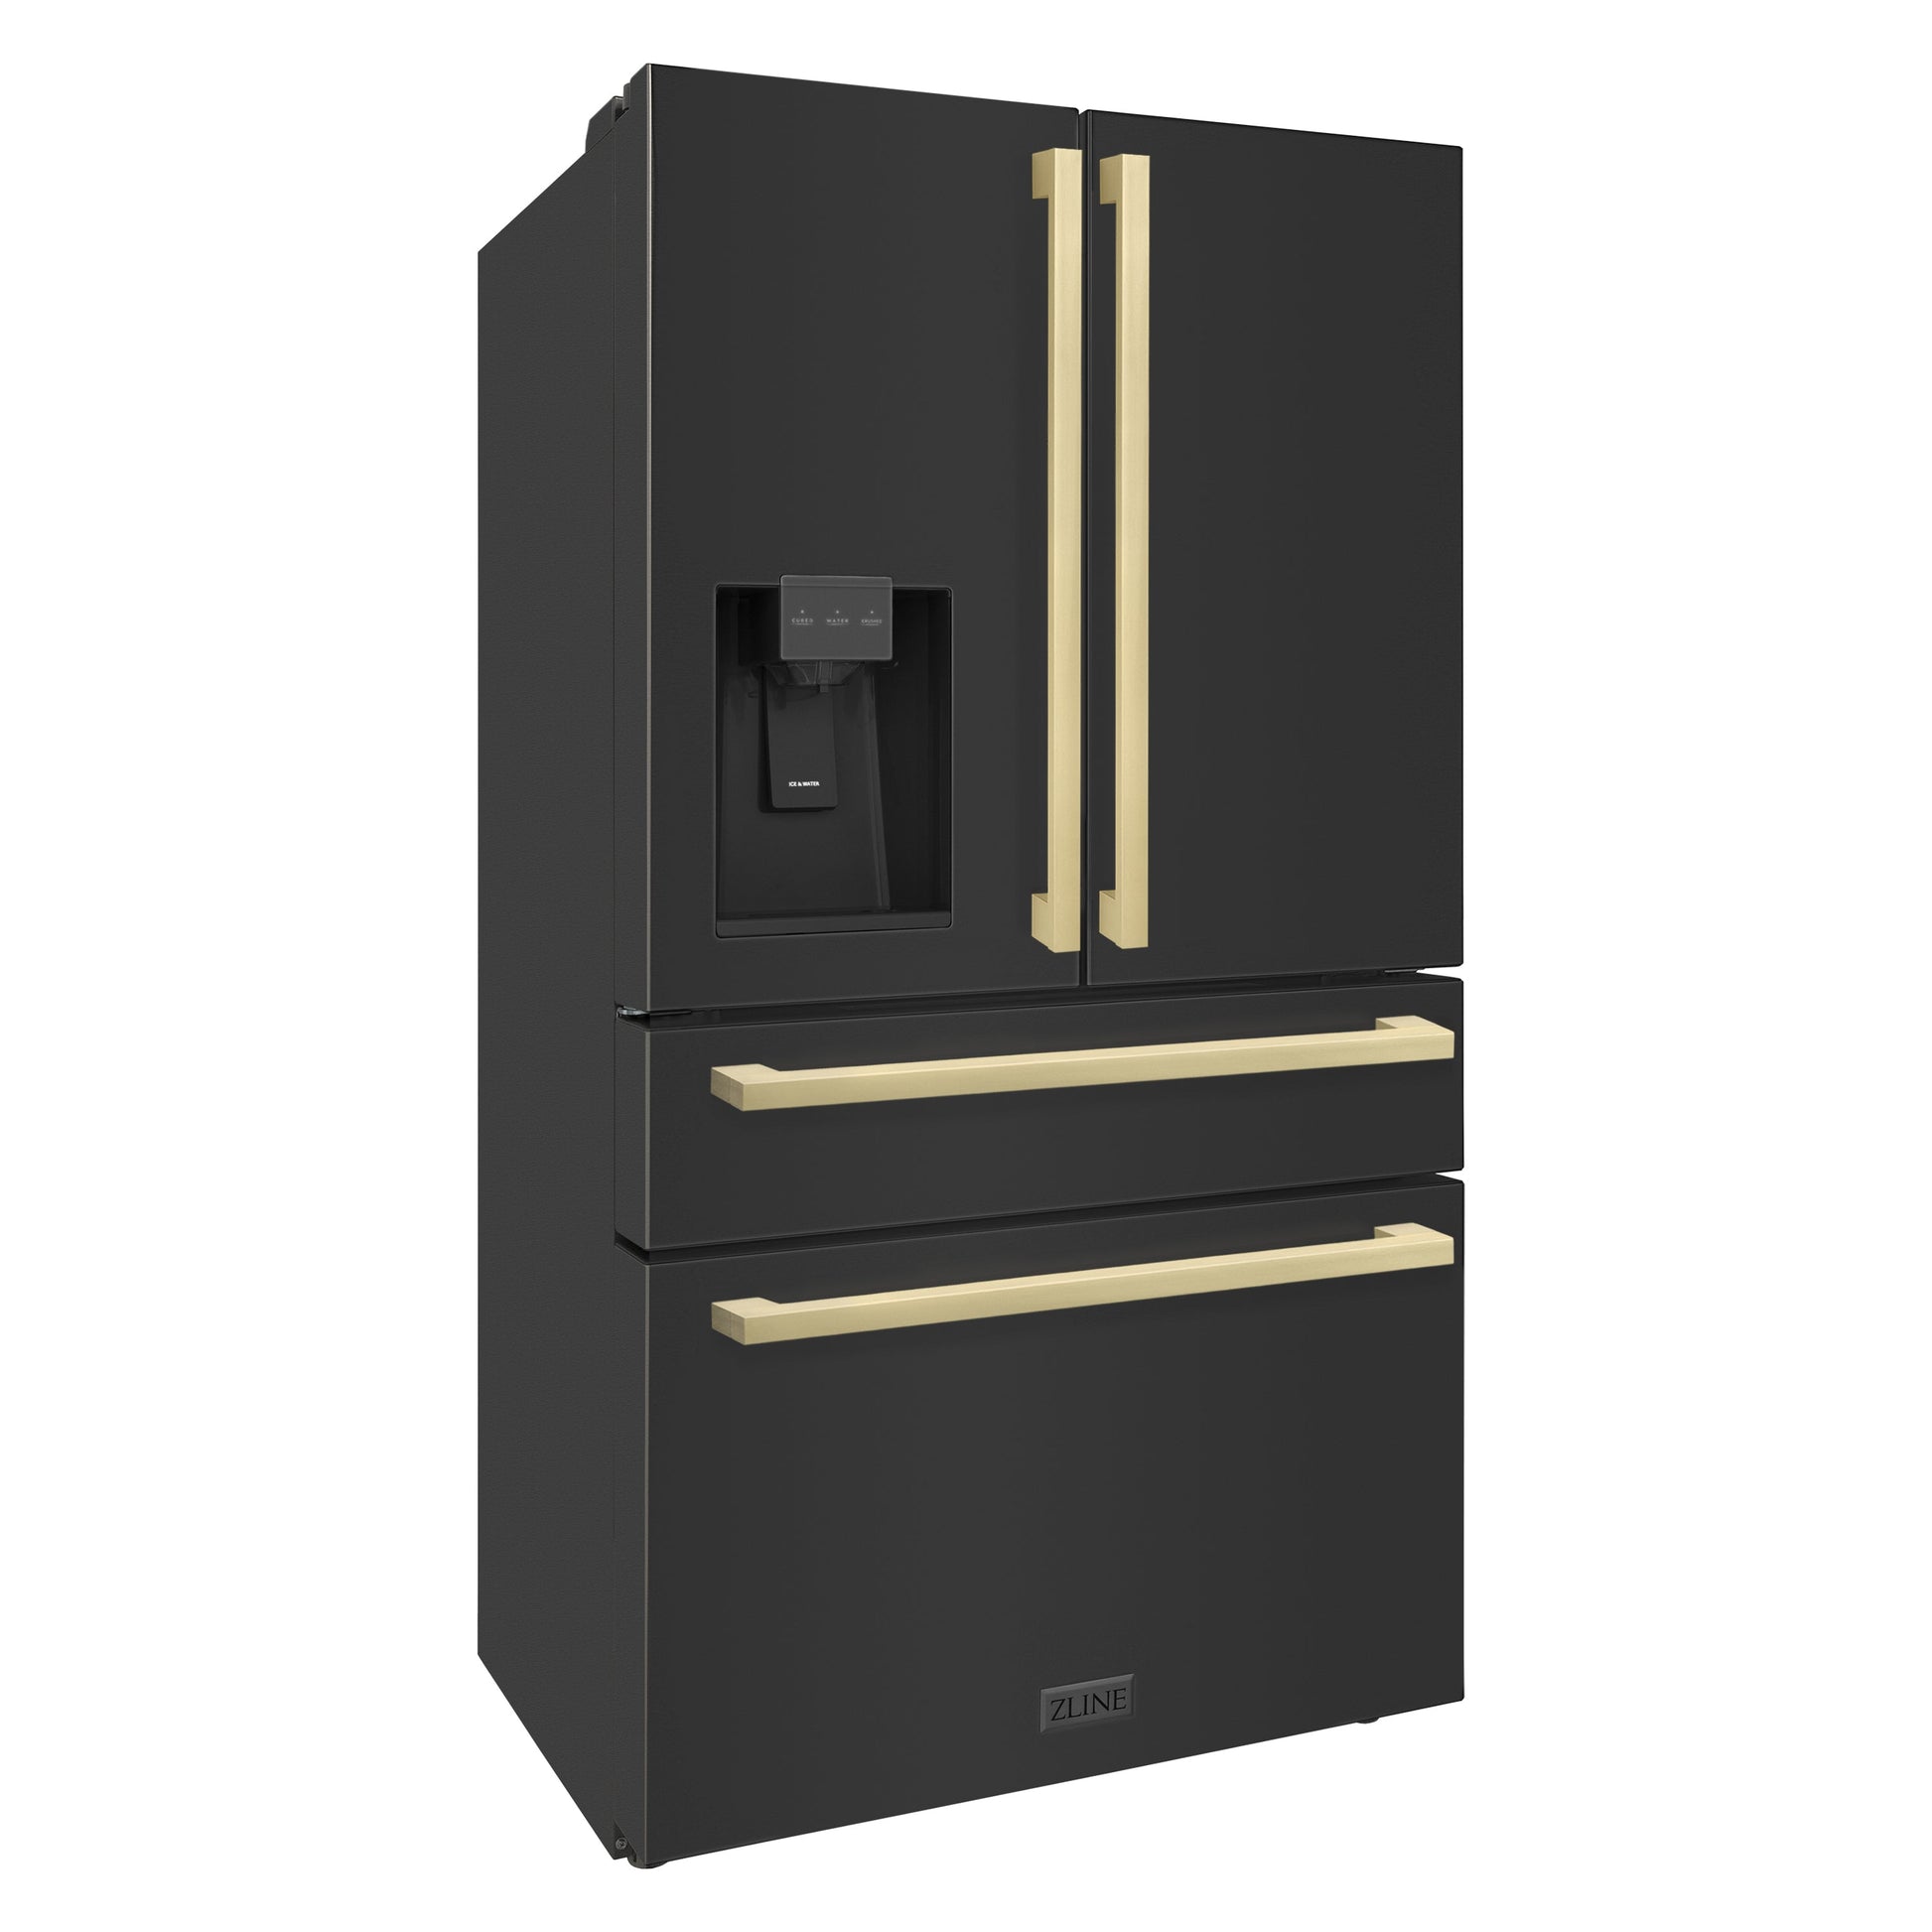 ZLINE 36" Autograph Edition 4-Door French Door Refrigerator with Water and Ice Dispenser - Black Stainless Steel with Champagne Bronze Square Handles